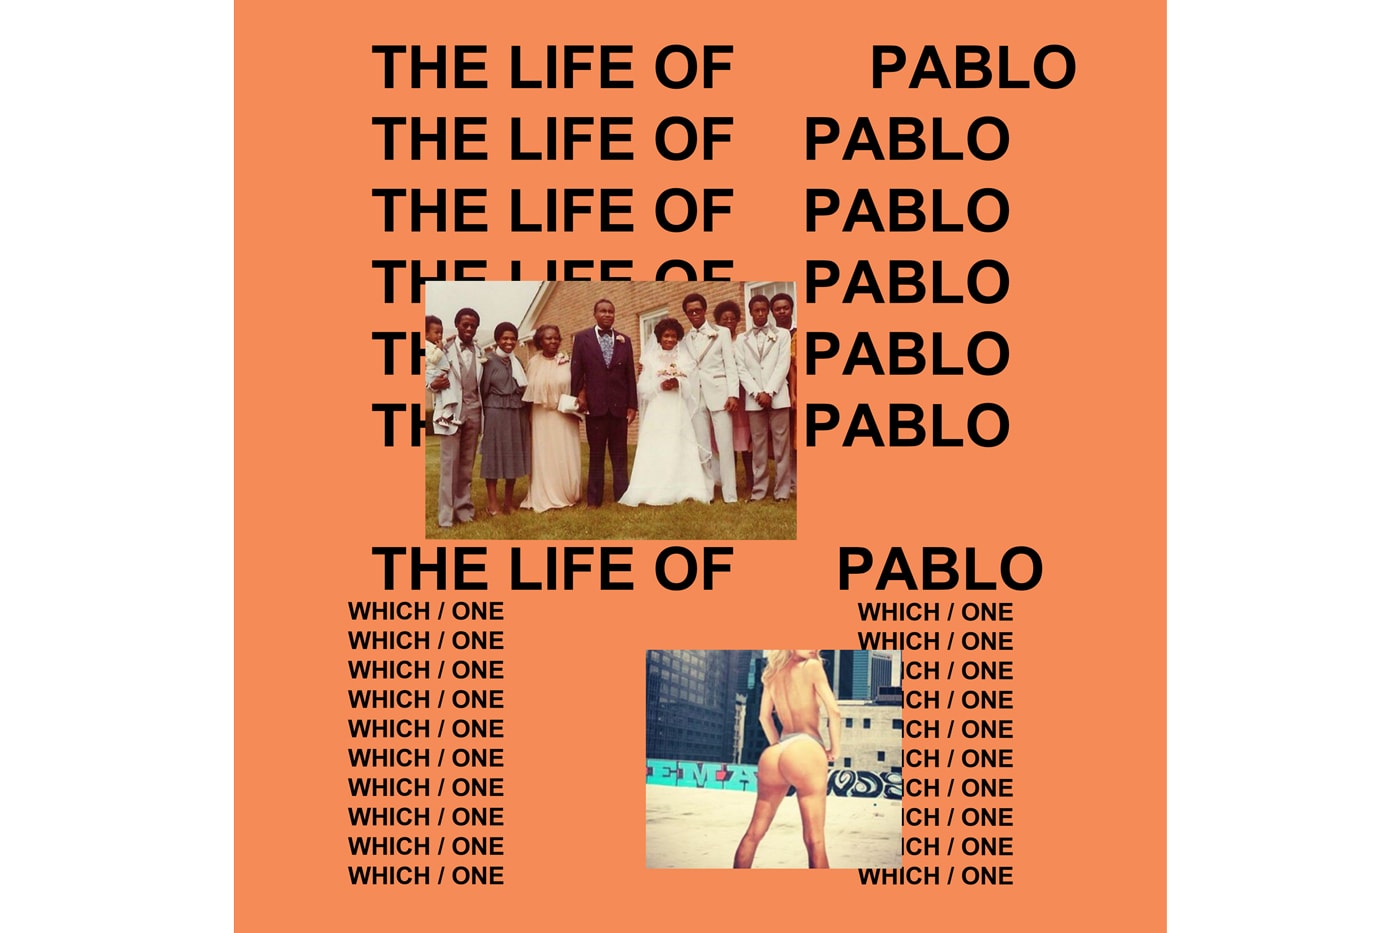 Kanye West Premieres 'The Life of Pablo' and Yeezy Season 3